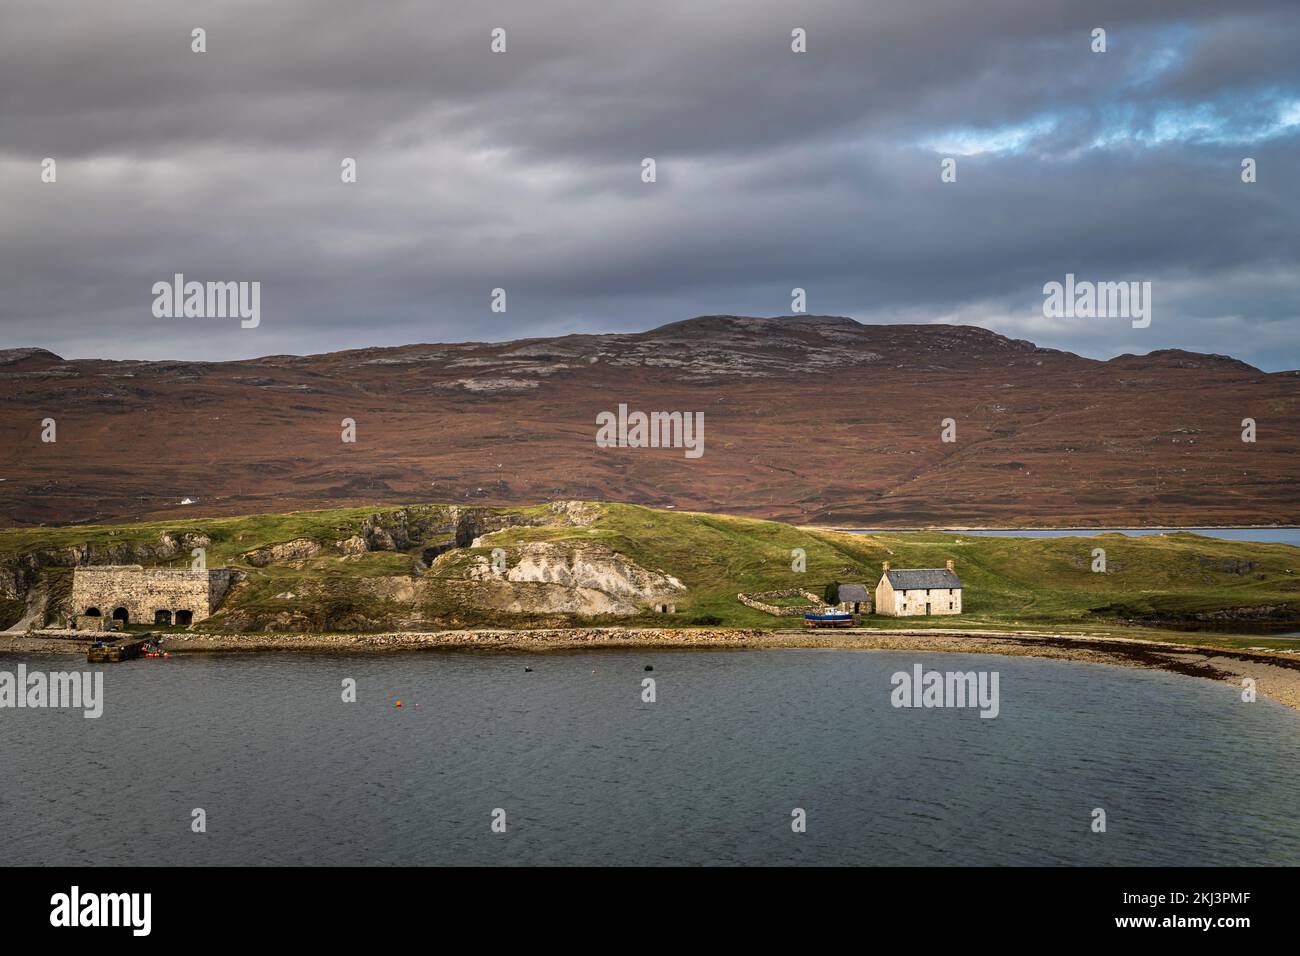 A still, autumnal HDR image of Ard Neakie peninsula with the lime kilns, quarry and ferry house in Loch Eriboll, Sutherland, Scotland. 27 October 2022 Stock Photo